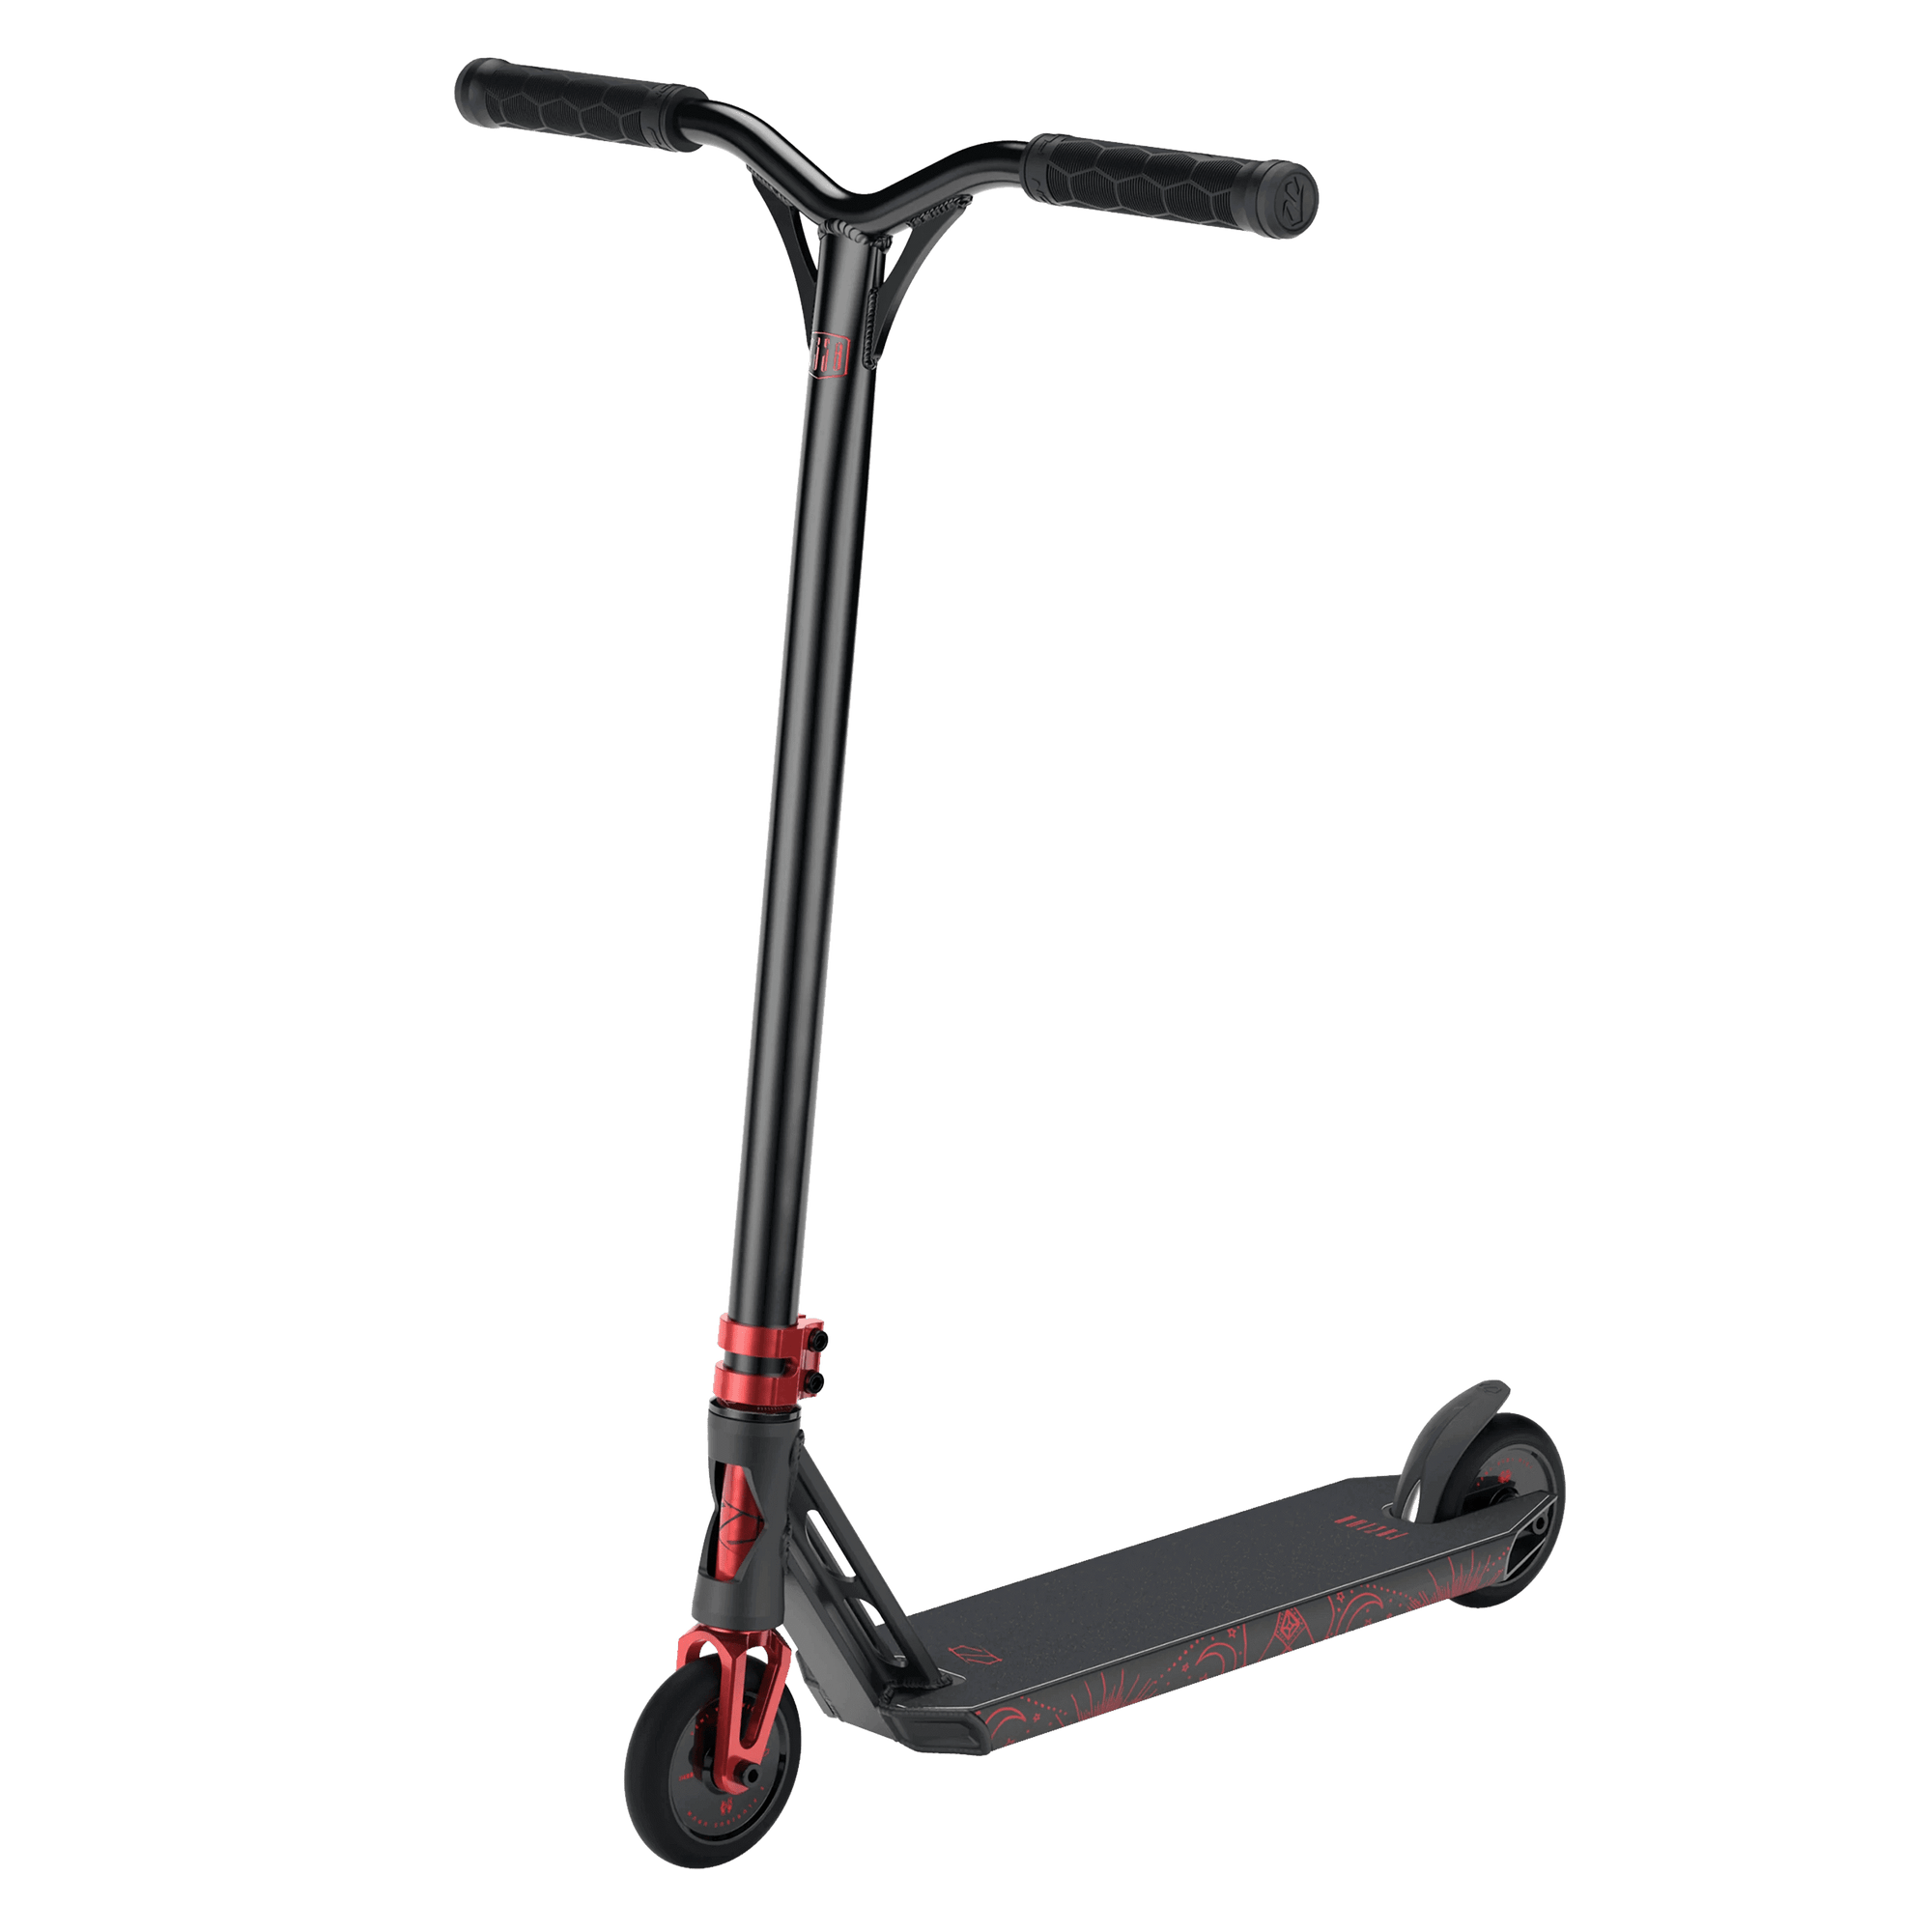 Fuzion Z350 Complete Scooter |COMPLETE SCOOTERS |$169.99 |TSP The Shop | 2022 Fuzion Z350 | The Shop Pro Scooter Lab